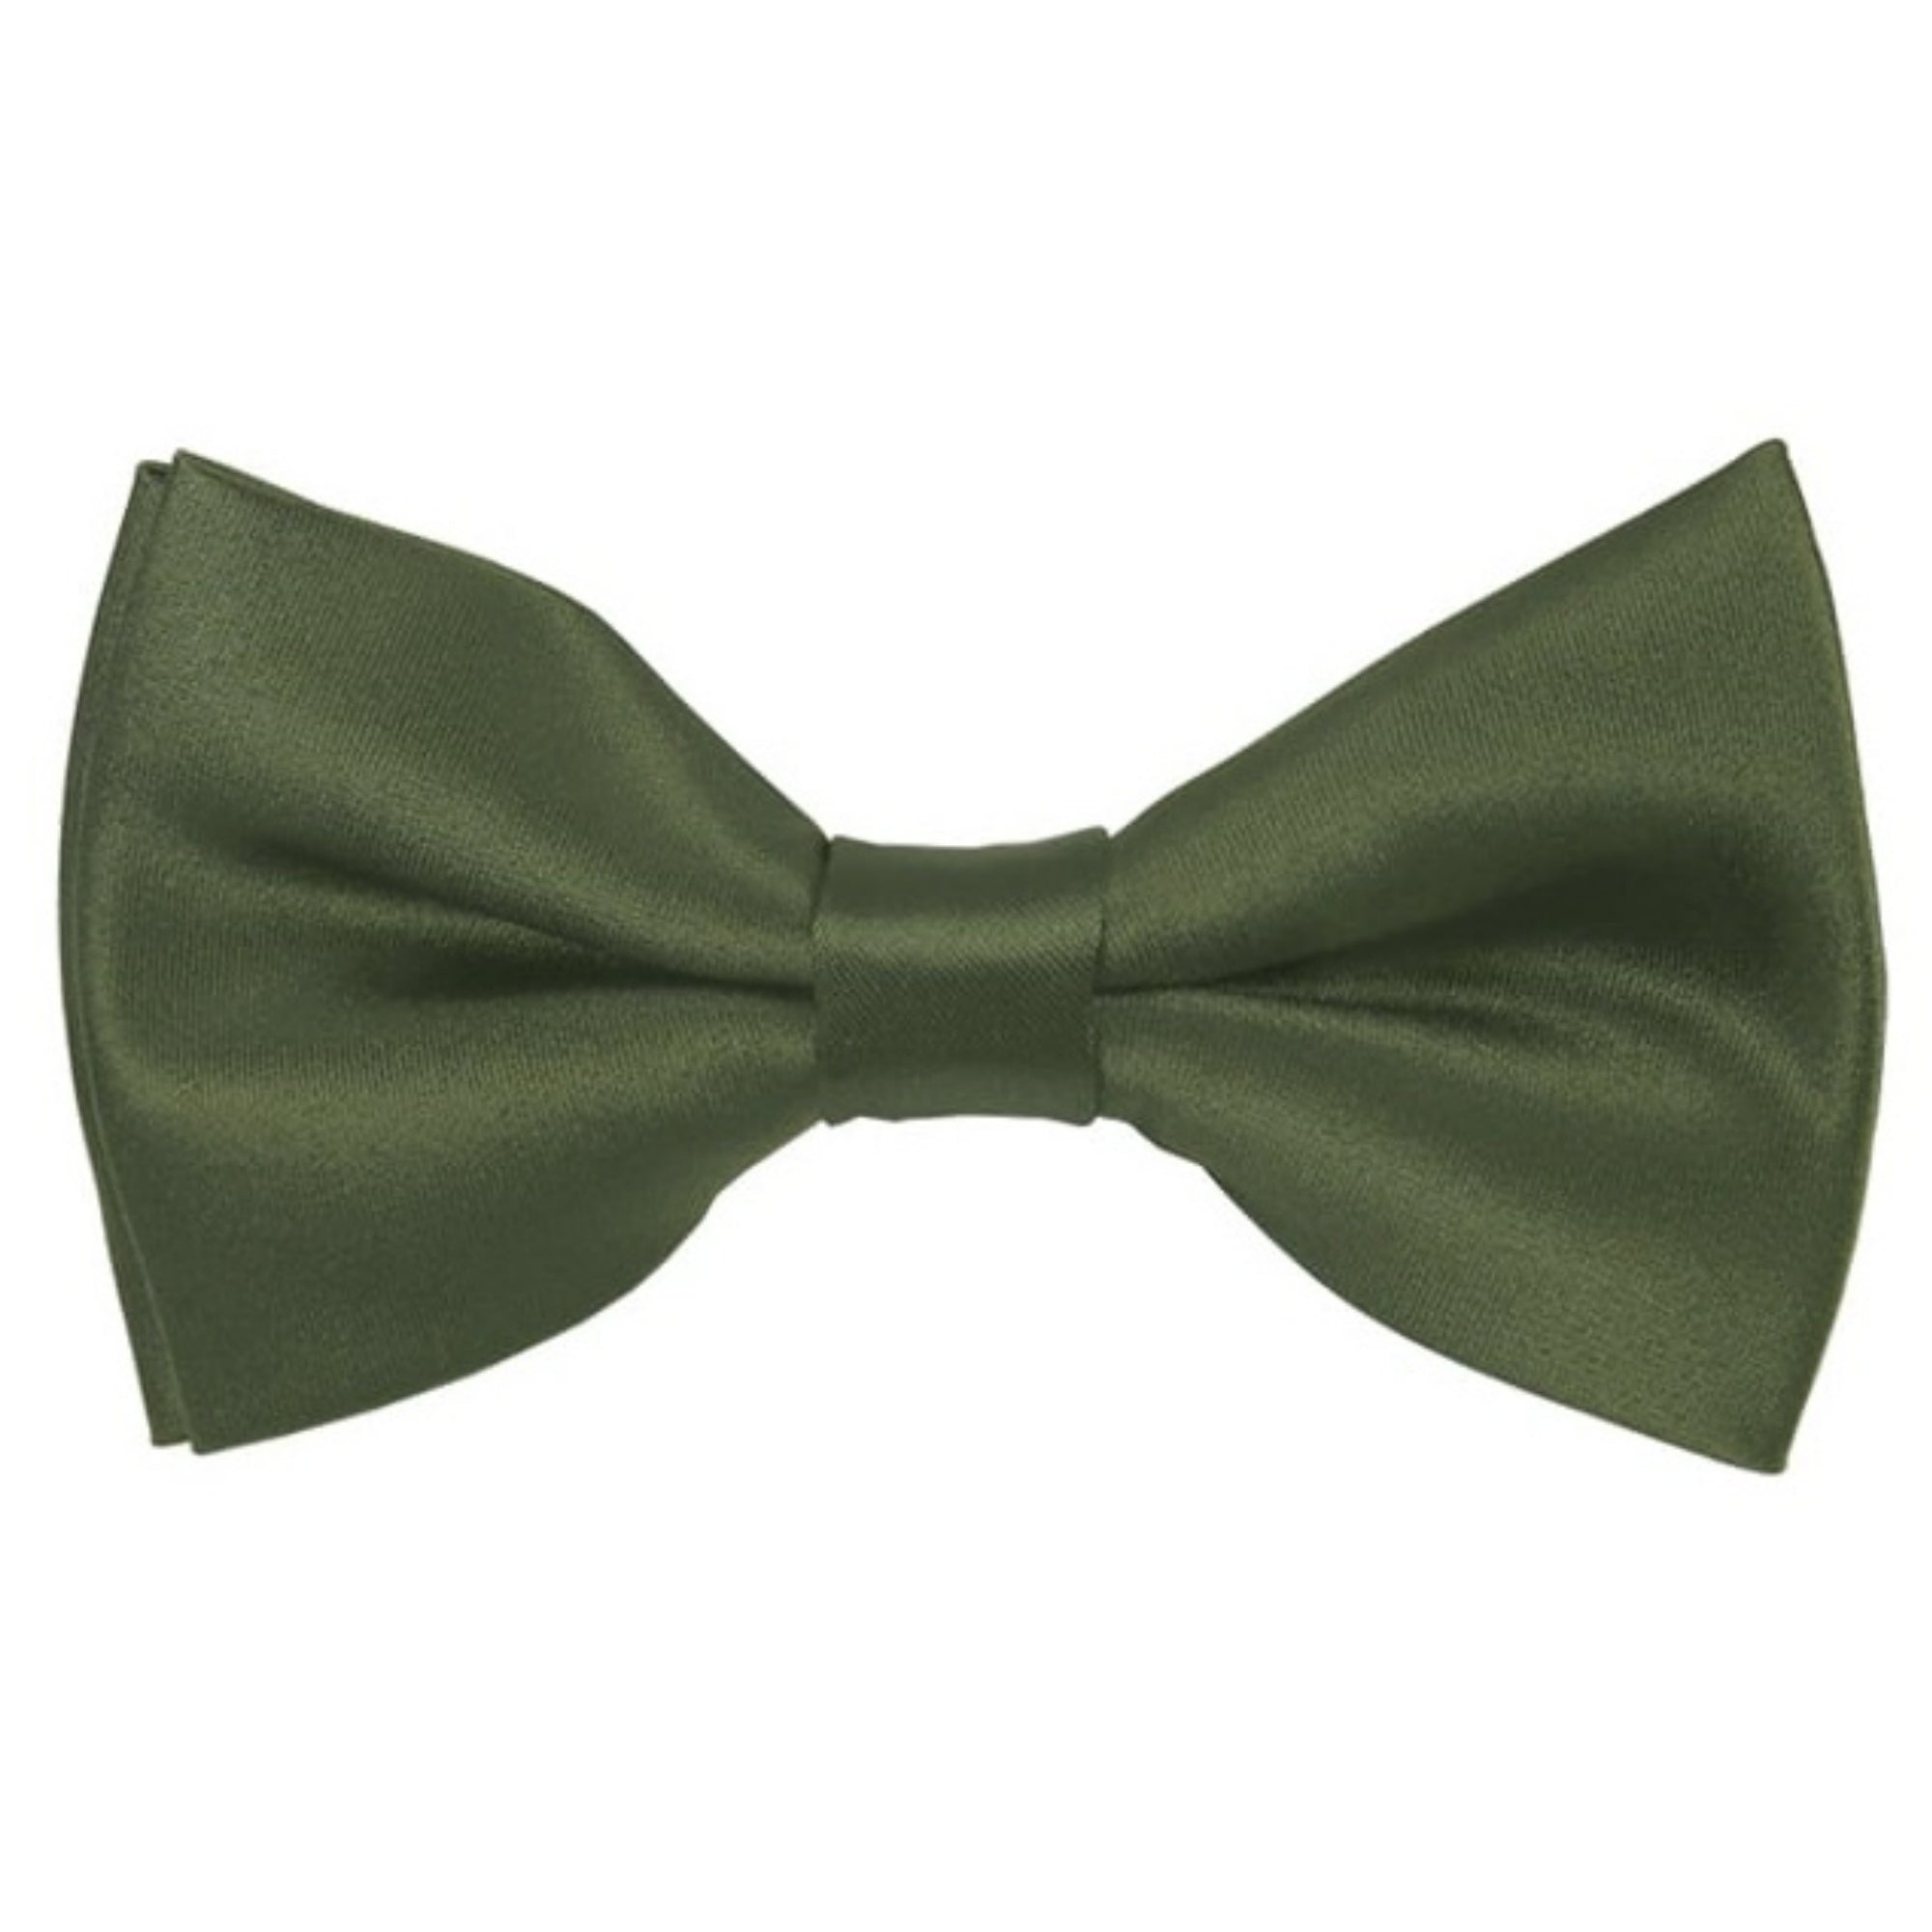 TheDapperTie Men's Solid Color 2.5 W And 4.5 L Inch Pre-Tied adjustable Bow Ties Men's Solid Color Bow Tie TheDapperTie Dark Olive  